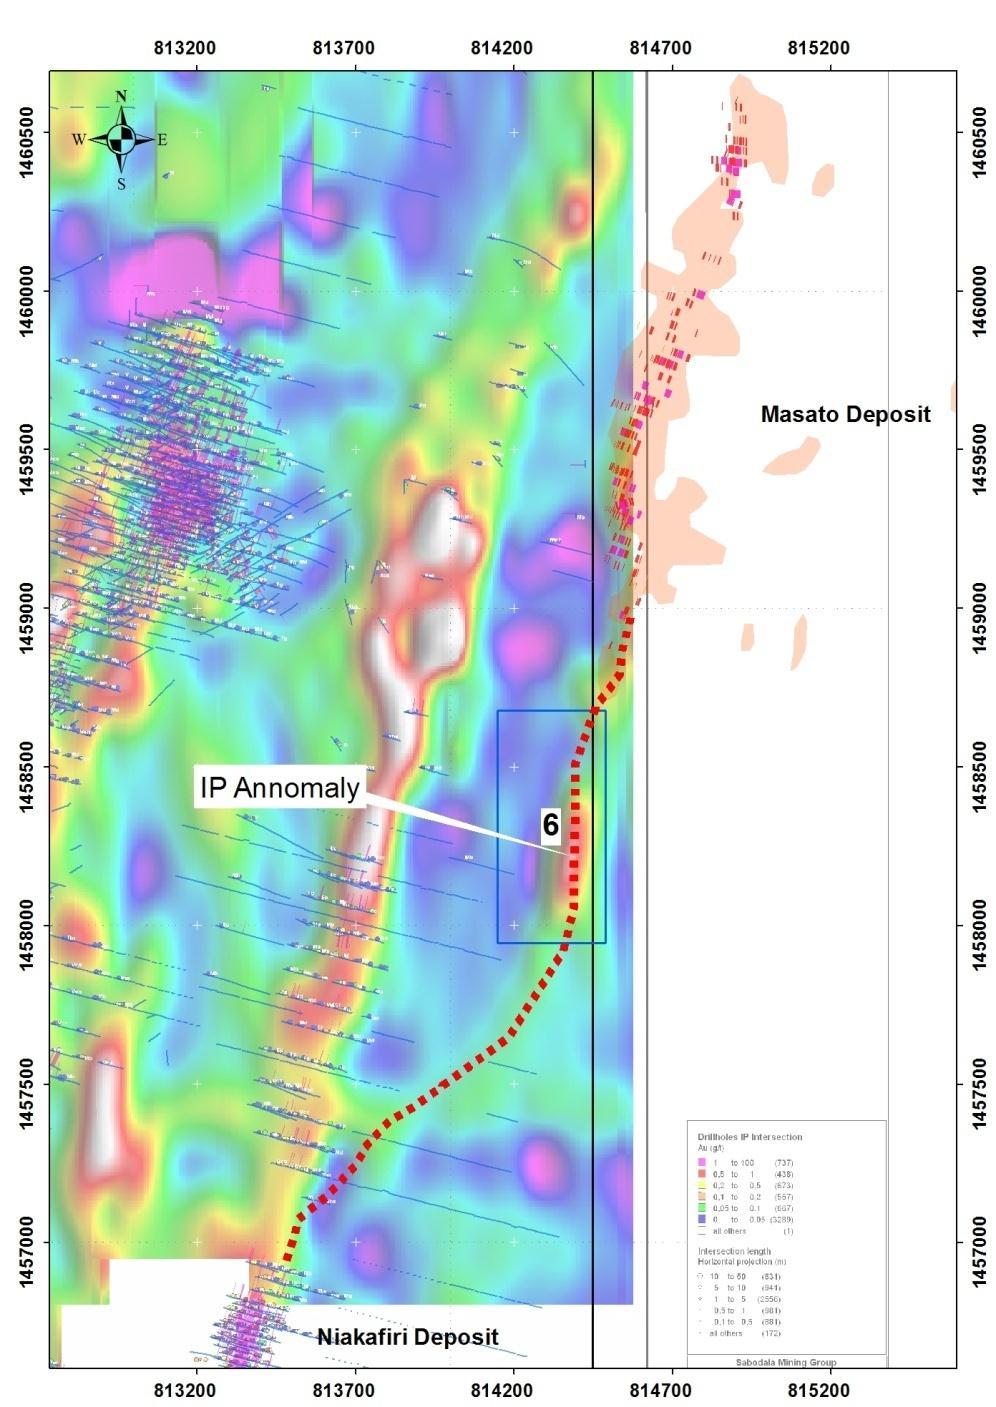 MINE LICENSE EXPLORATION MASATO Main Flat Extension Sabodala Pit Sambaya Hill Masato Down Dip 2011 Confirmed strike length of 500m and dip extent of 200m Q1 2012 Strike length extended to 1,600m and